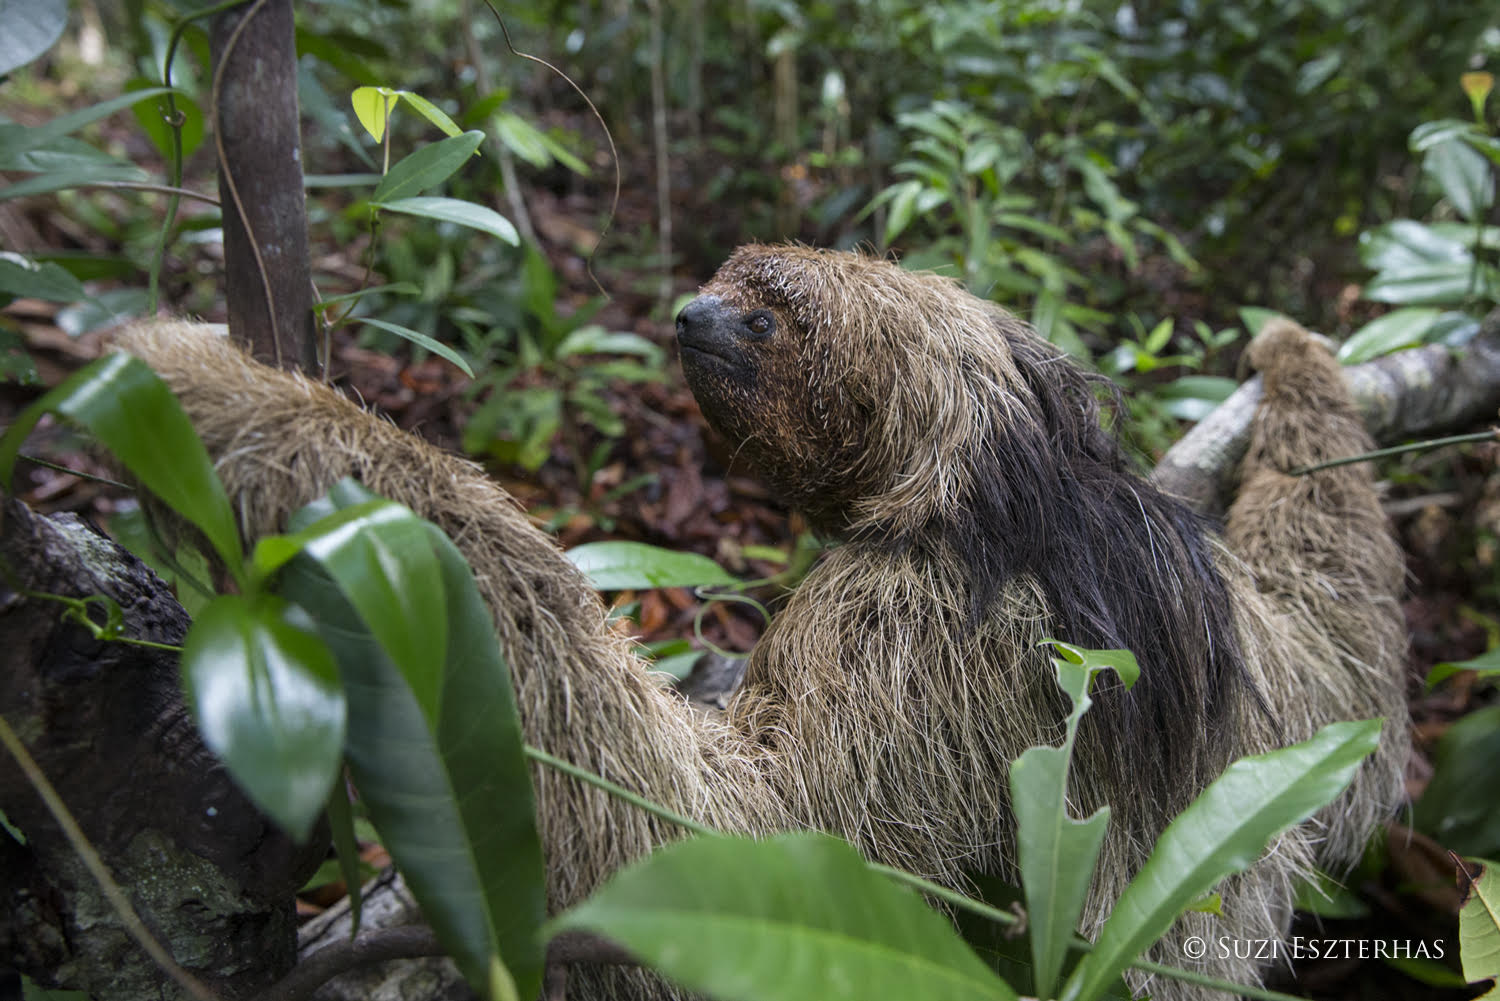 How many Sloths are left in the world? The Sloth Conservation Foundation